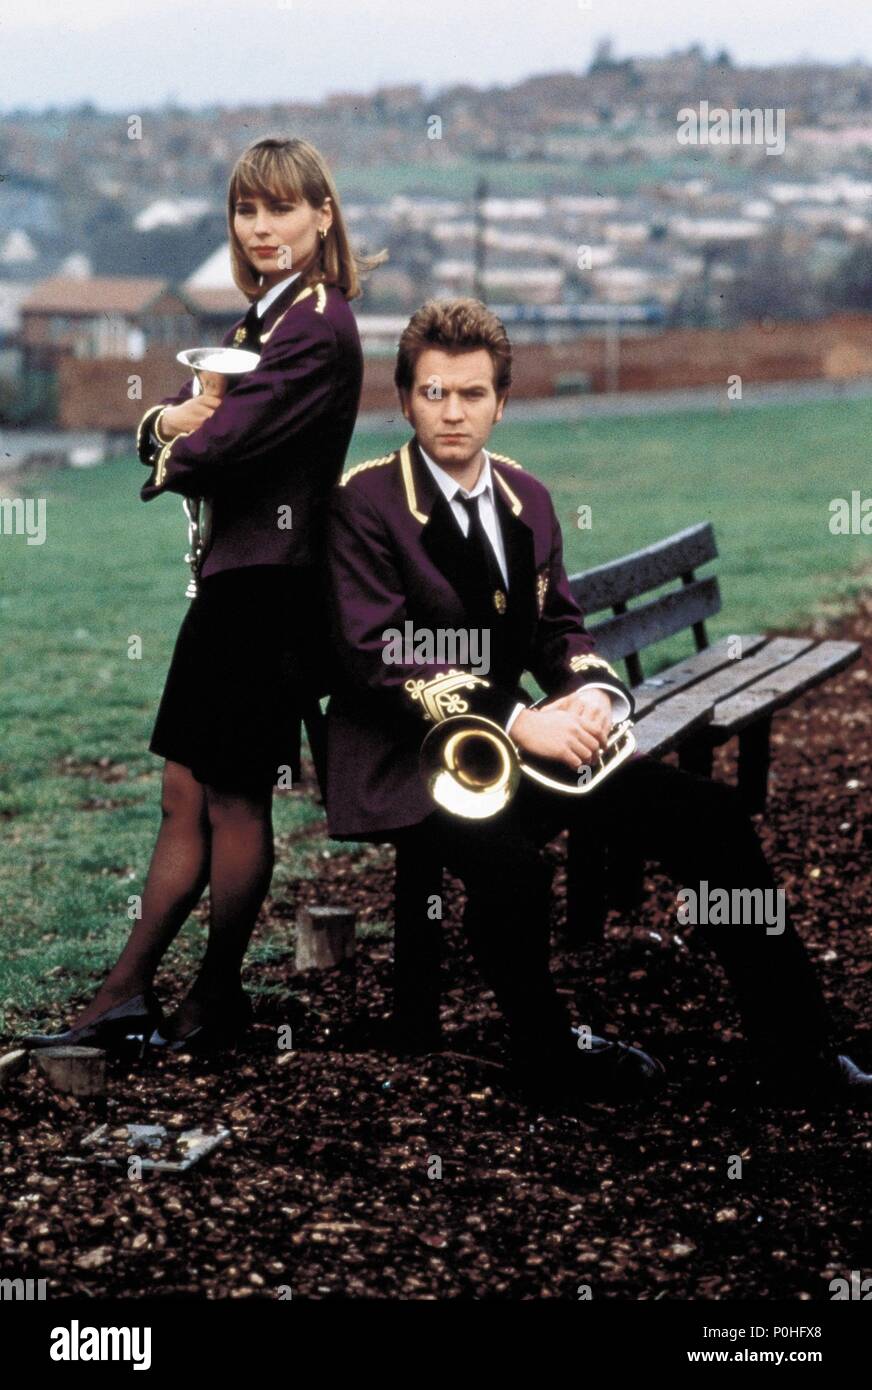 Original Film Title: BRASSED OFF.  English Title: BRASSED OFF.  Film Director: MARK HERMAN.  Year: 1996.  Stars: EWAN MCGREGOR; TARA FITZGERALD. Copyright: Editorial inside use only. This is a publicly distributed handout. Access rights only, no license of copyright provided. Mandatory authorization to Visual Icon (www.visual-icon.com) is required for the reproduction of this image. Credit: MIRAMAX / Album Stock Photo